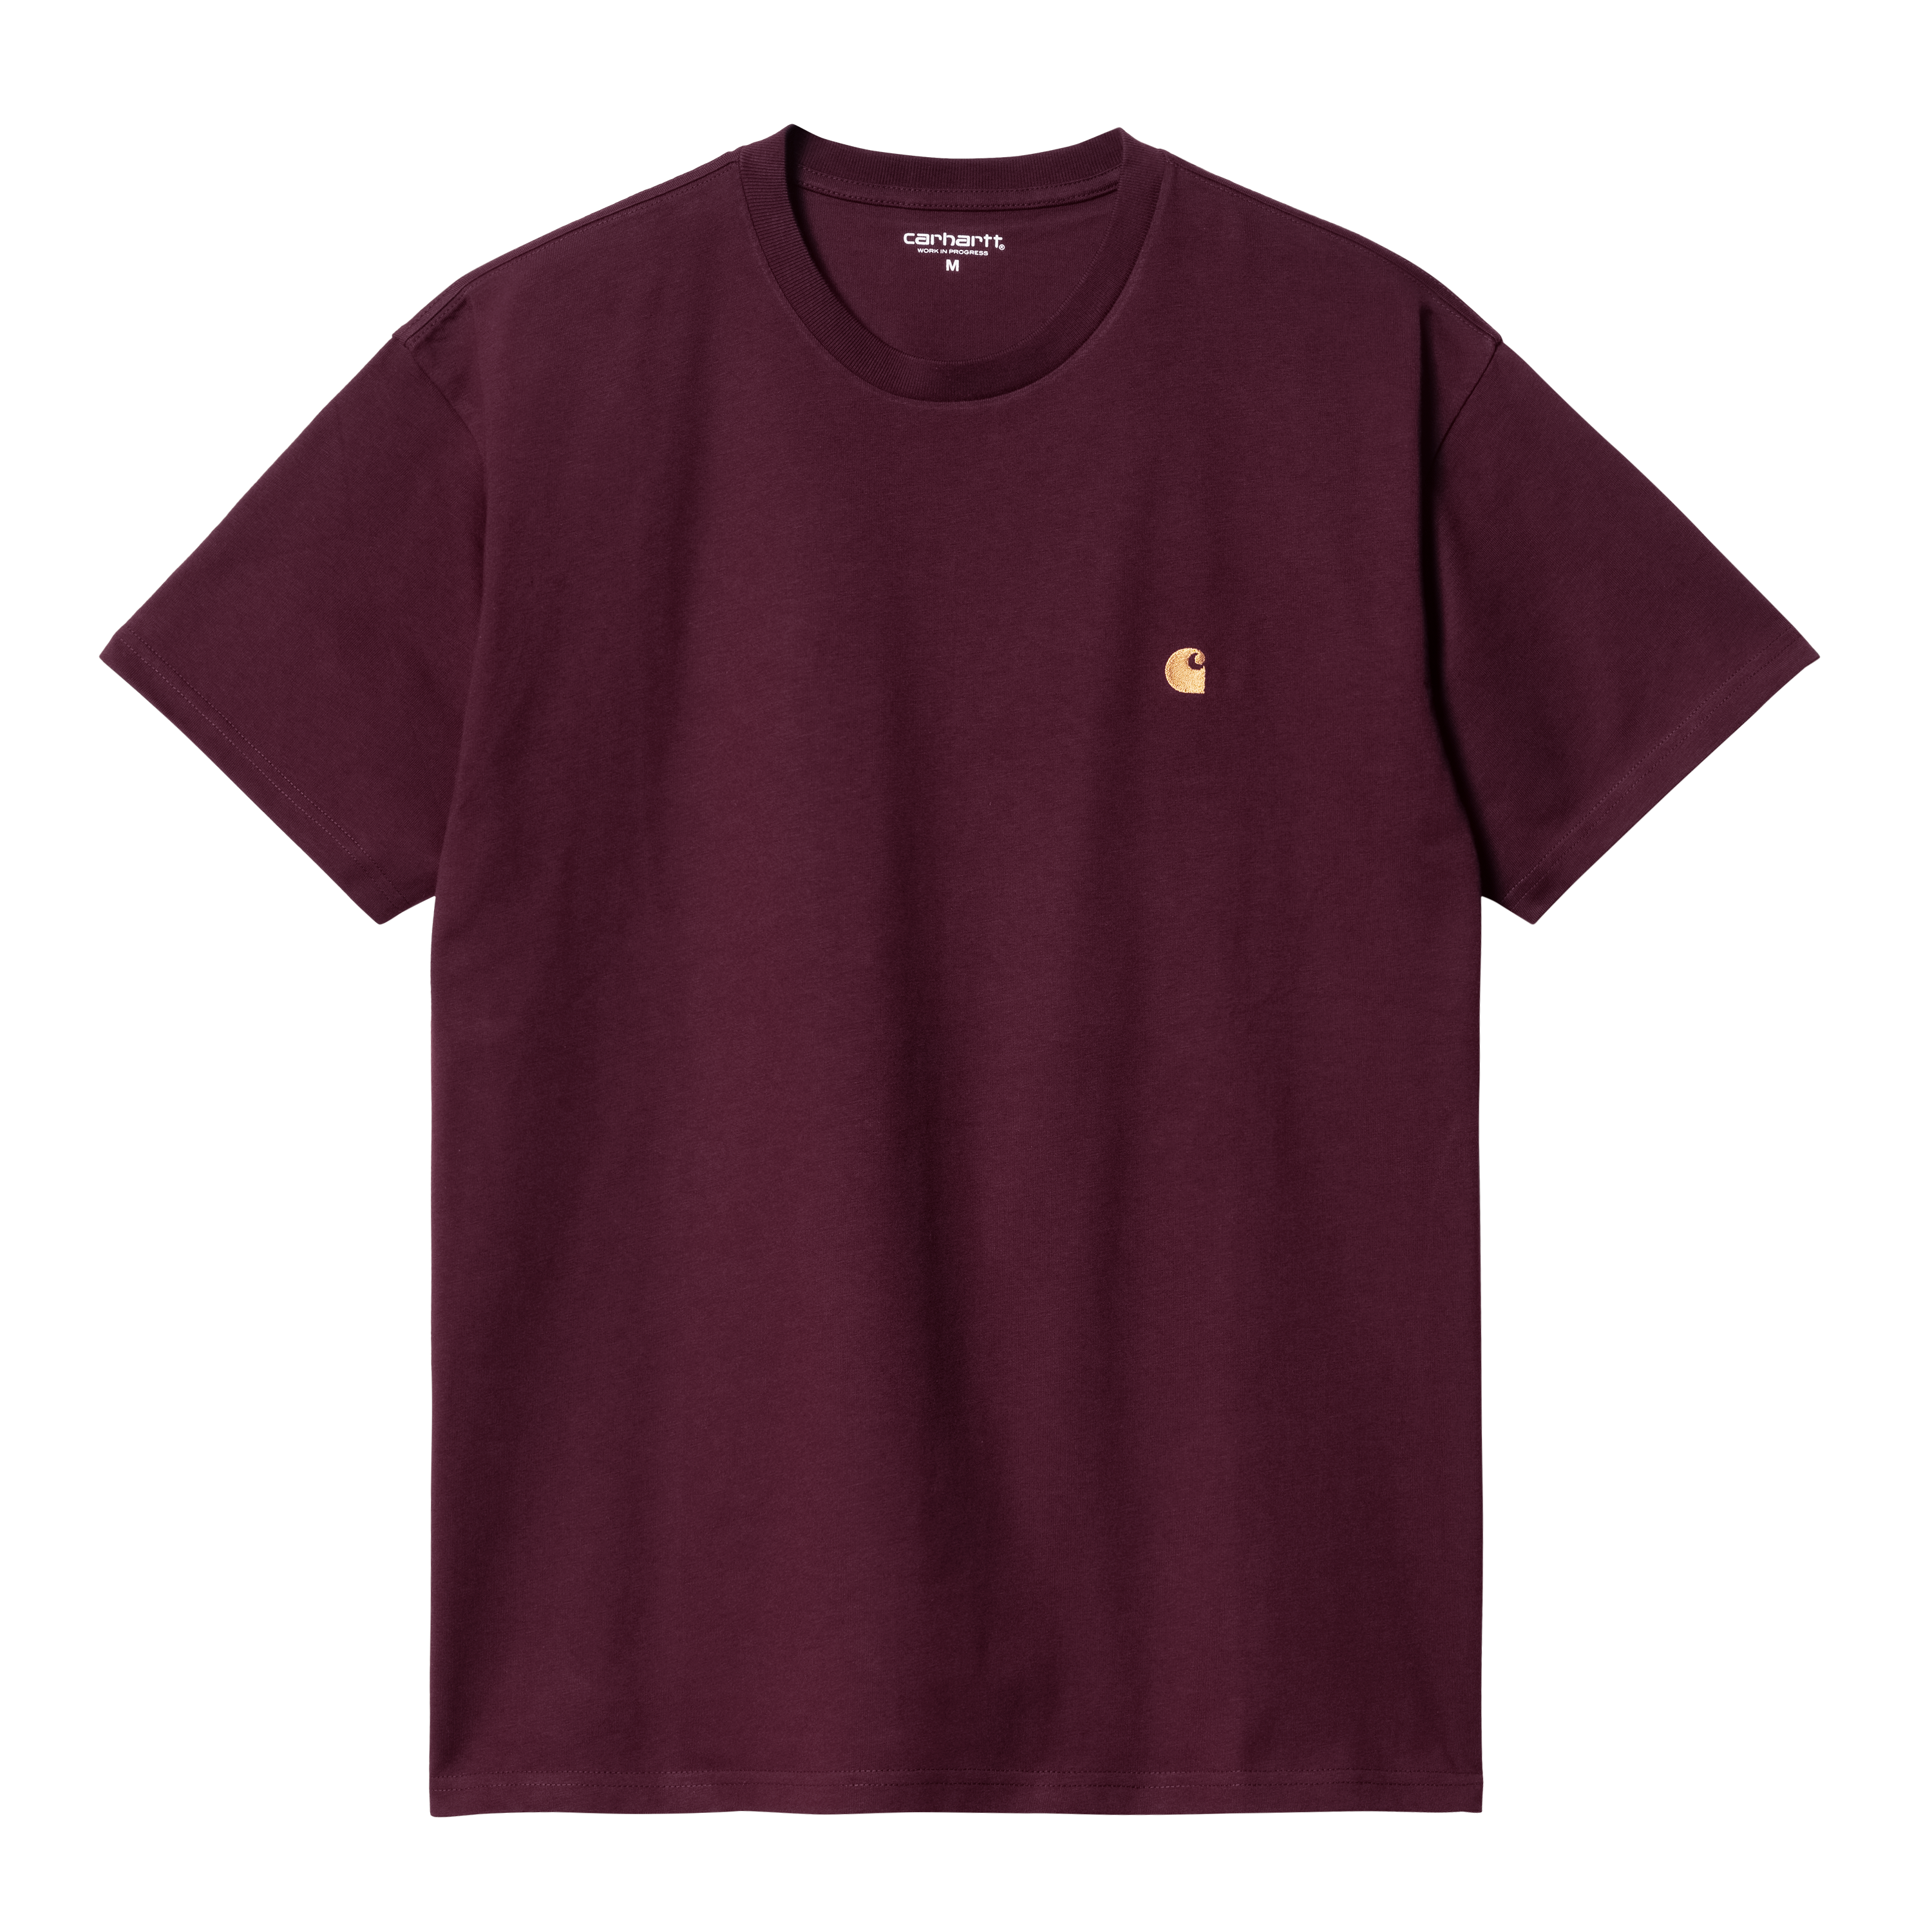 Carhartt WIP - CHASE T-SHIRT - Amarone/Gold